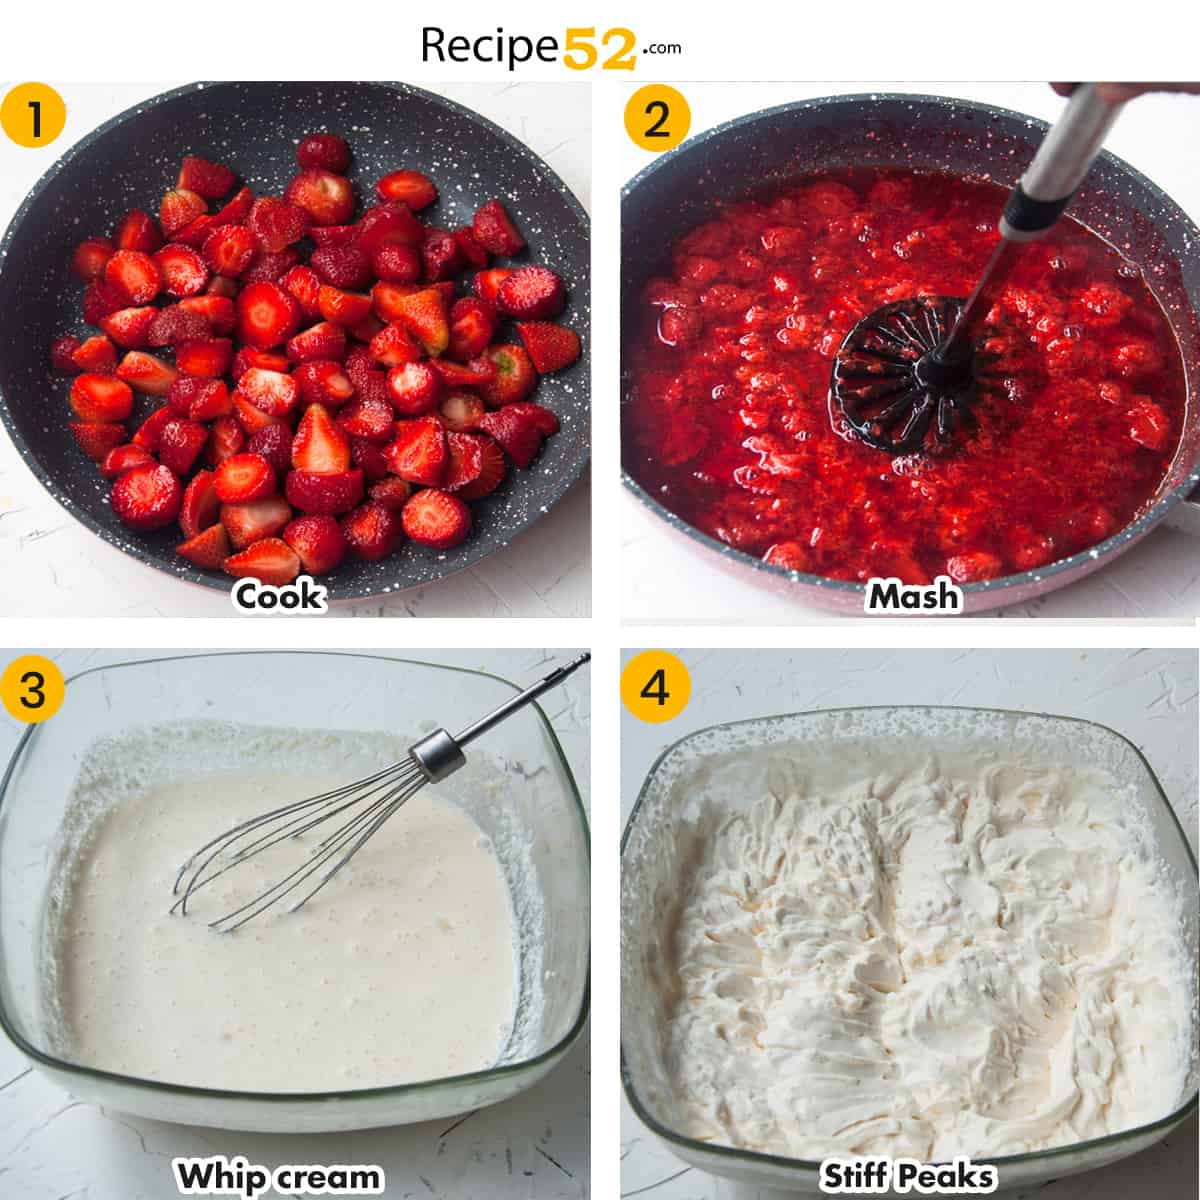 Steps to cook and mash strawberries. and whip cream.